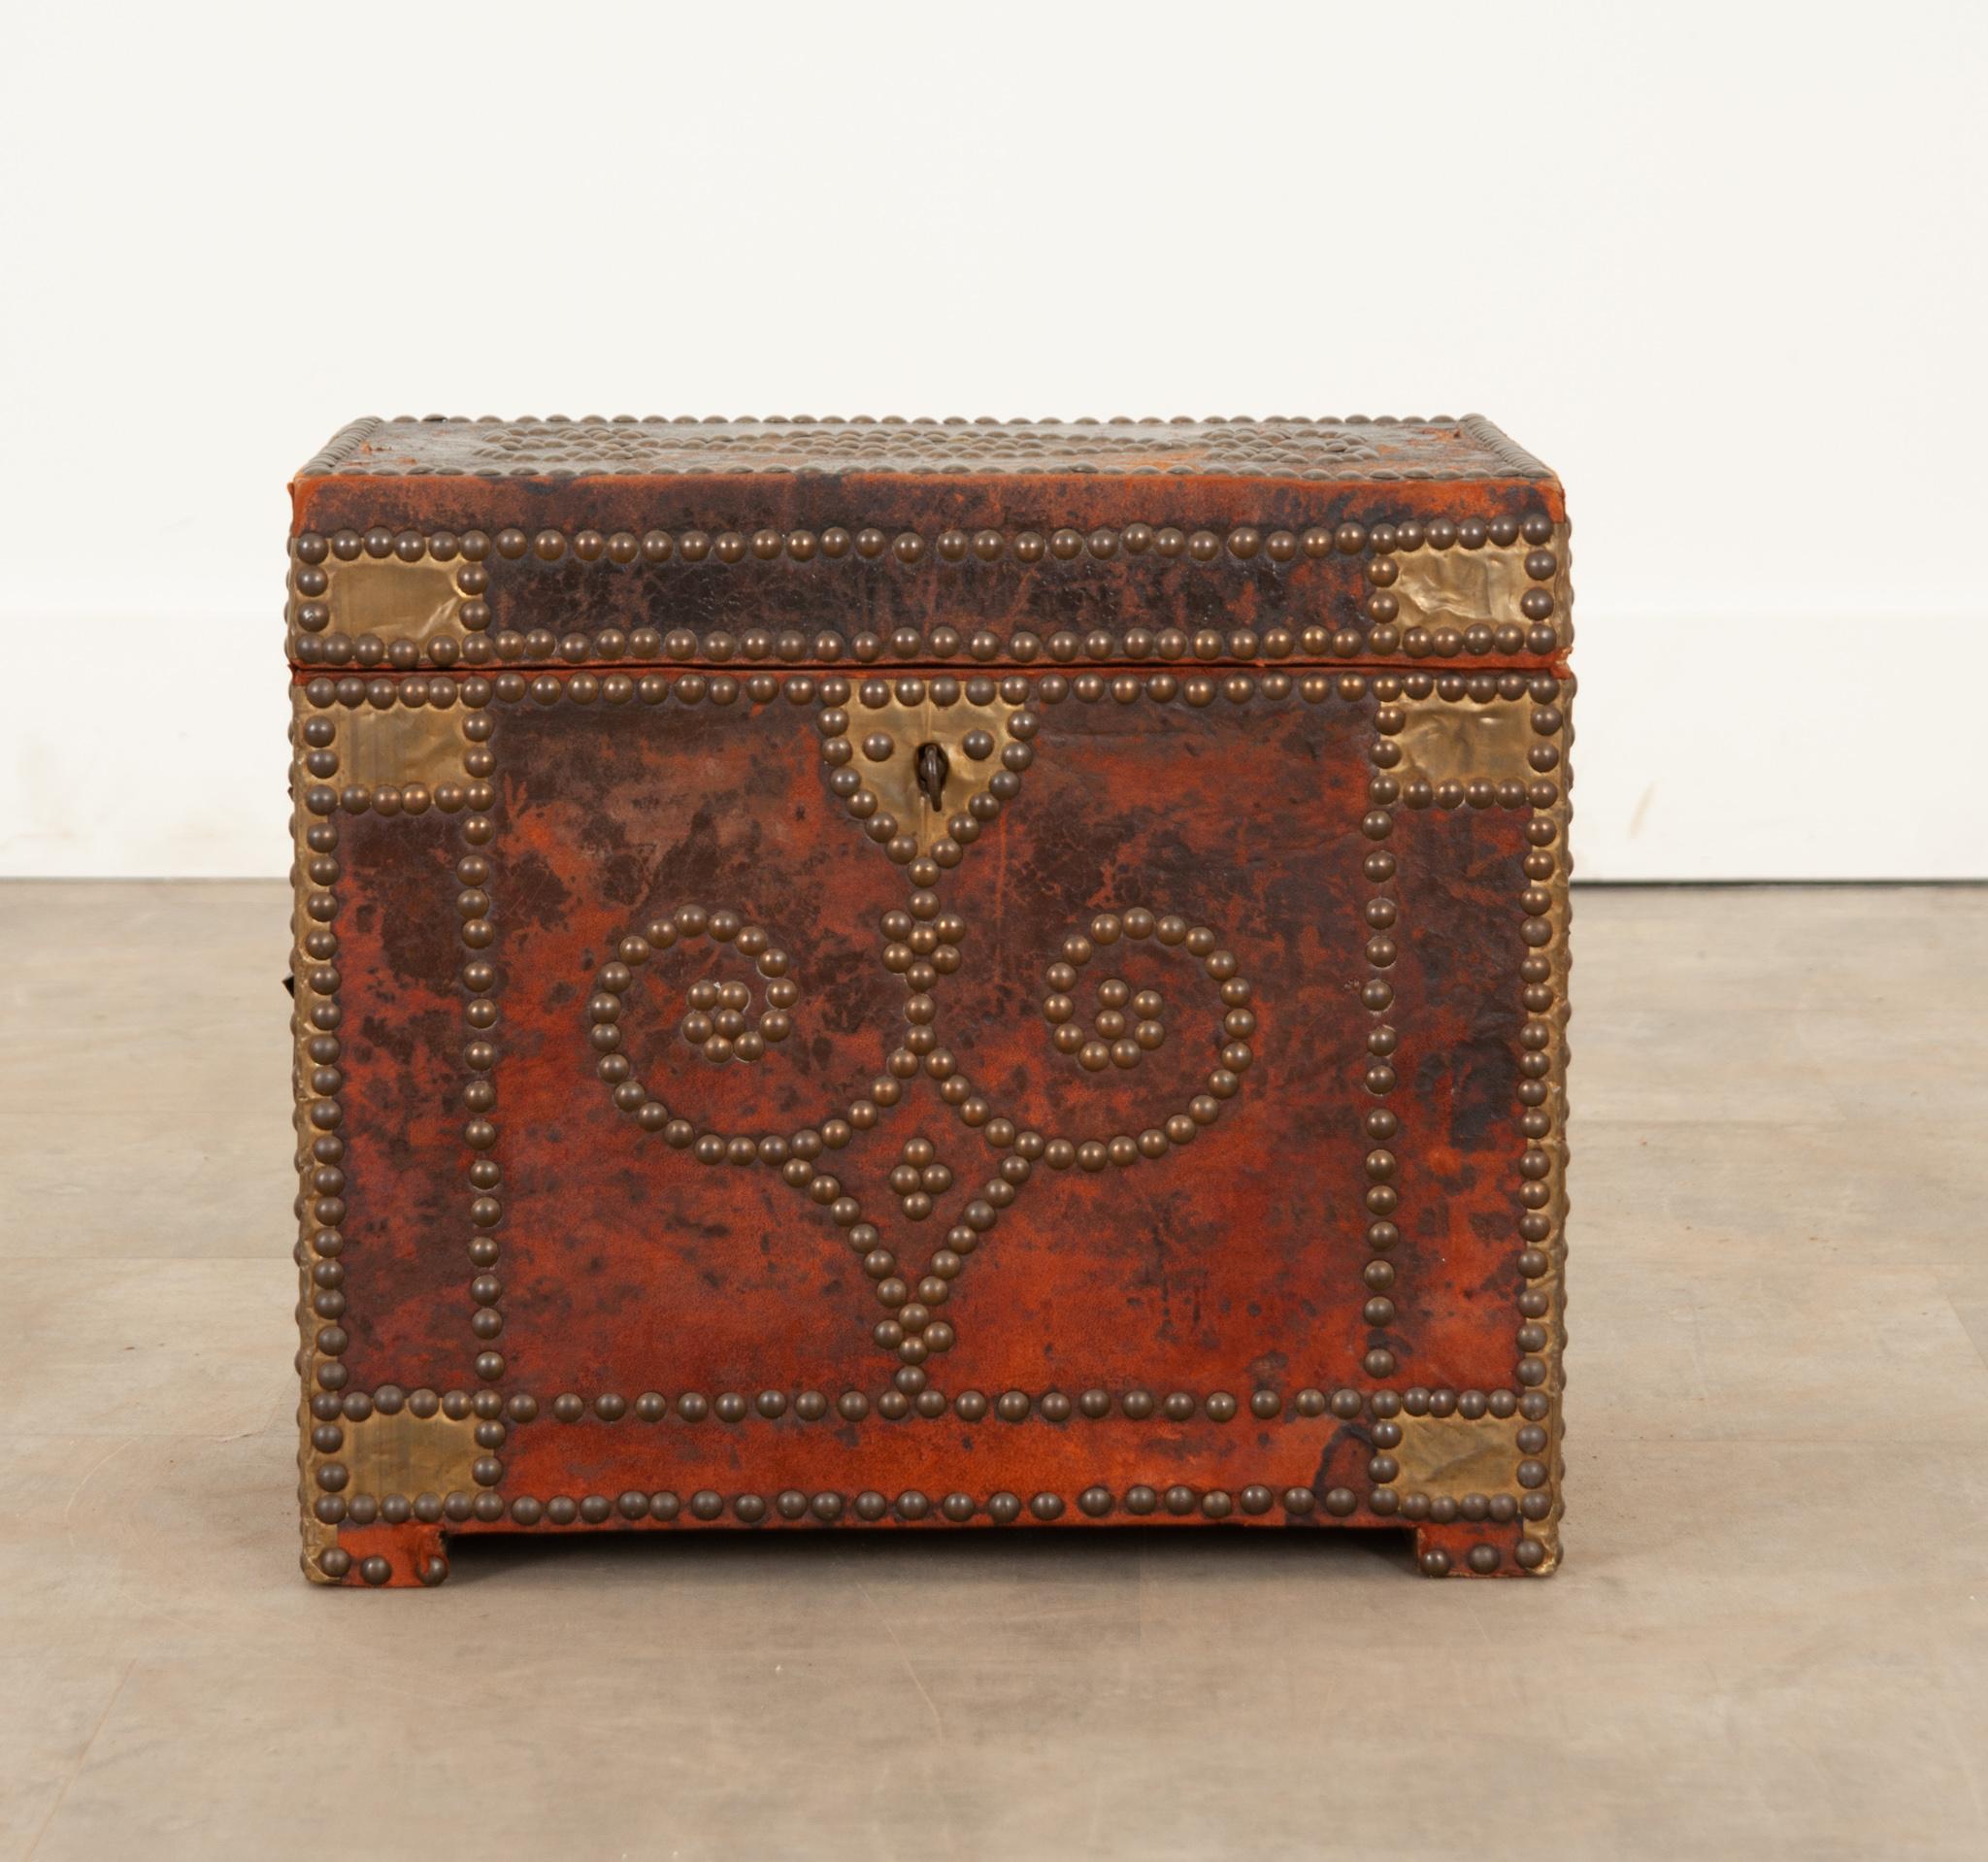 We absolutely love this decorative trunk from England! Bound in perfectly worn dark leather and adorned with brass studs in swirling patterns. The lock is in working condition and includes one key. A pair of simple handles on each side make it easy